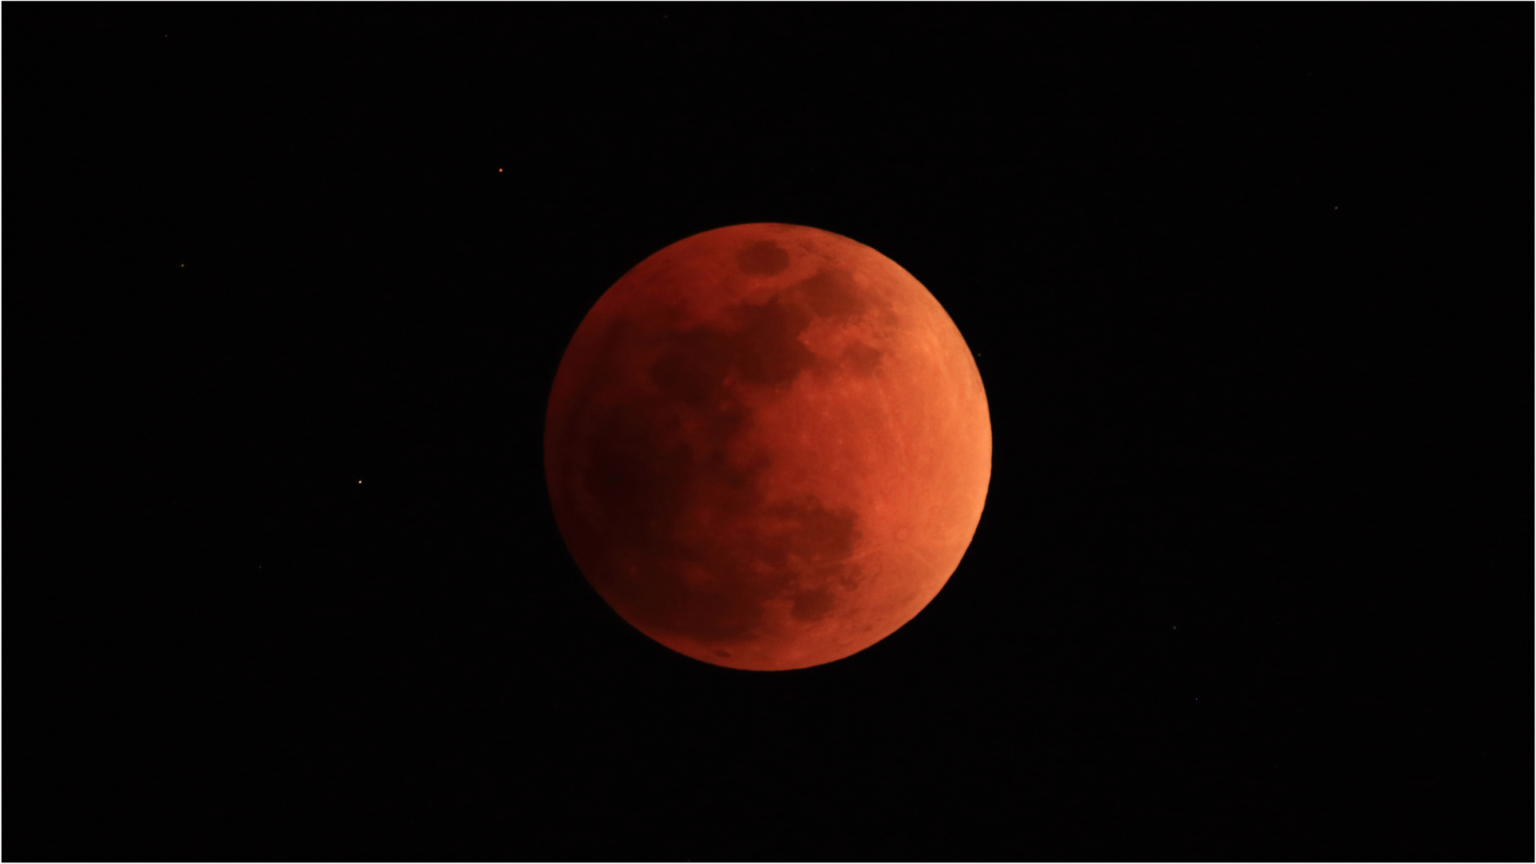 A total lunar eclipse in which the moon looks red.